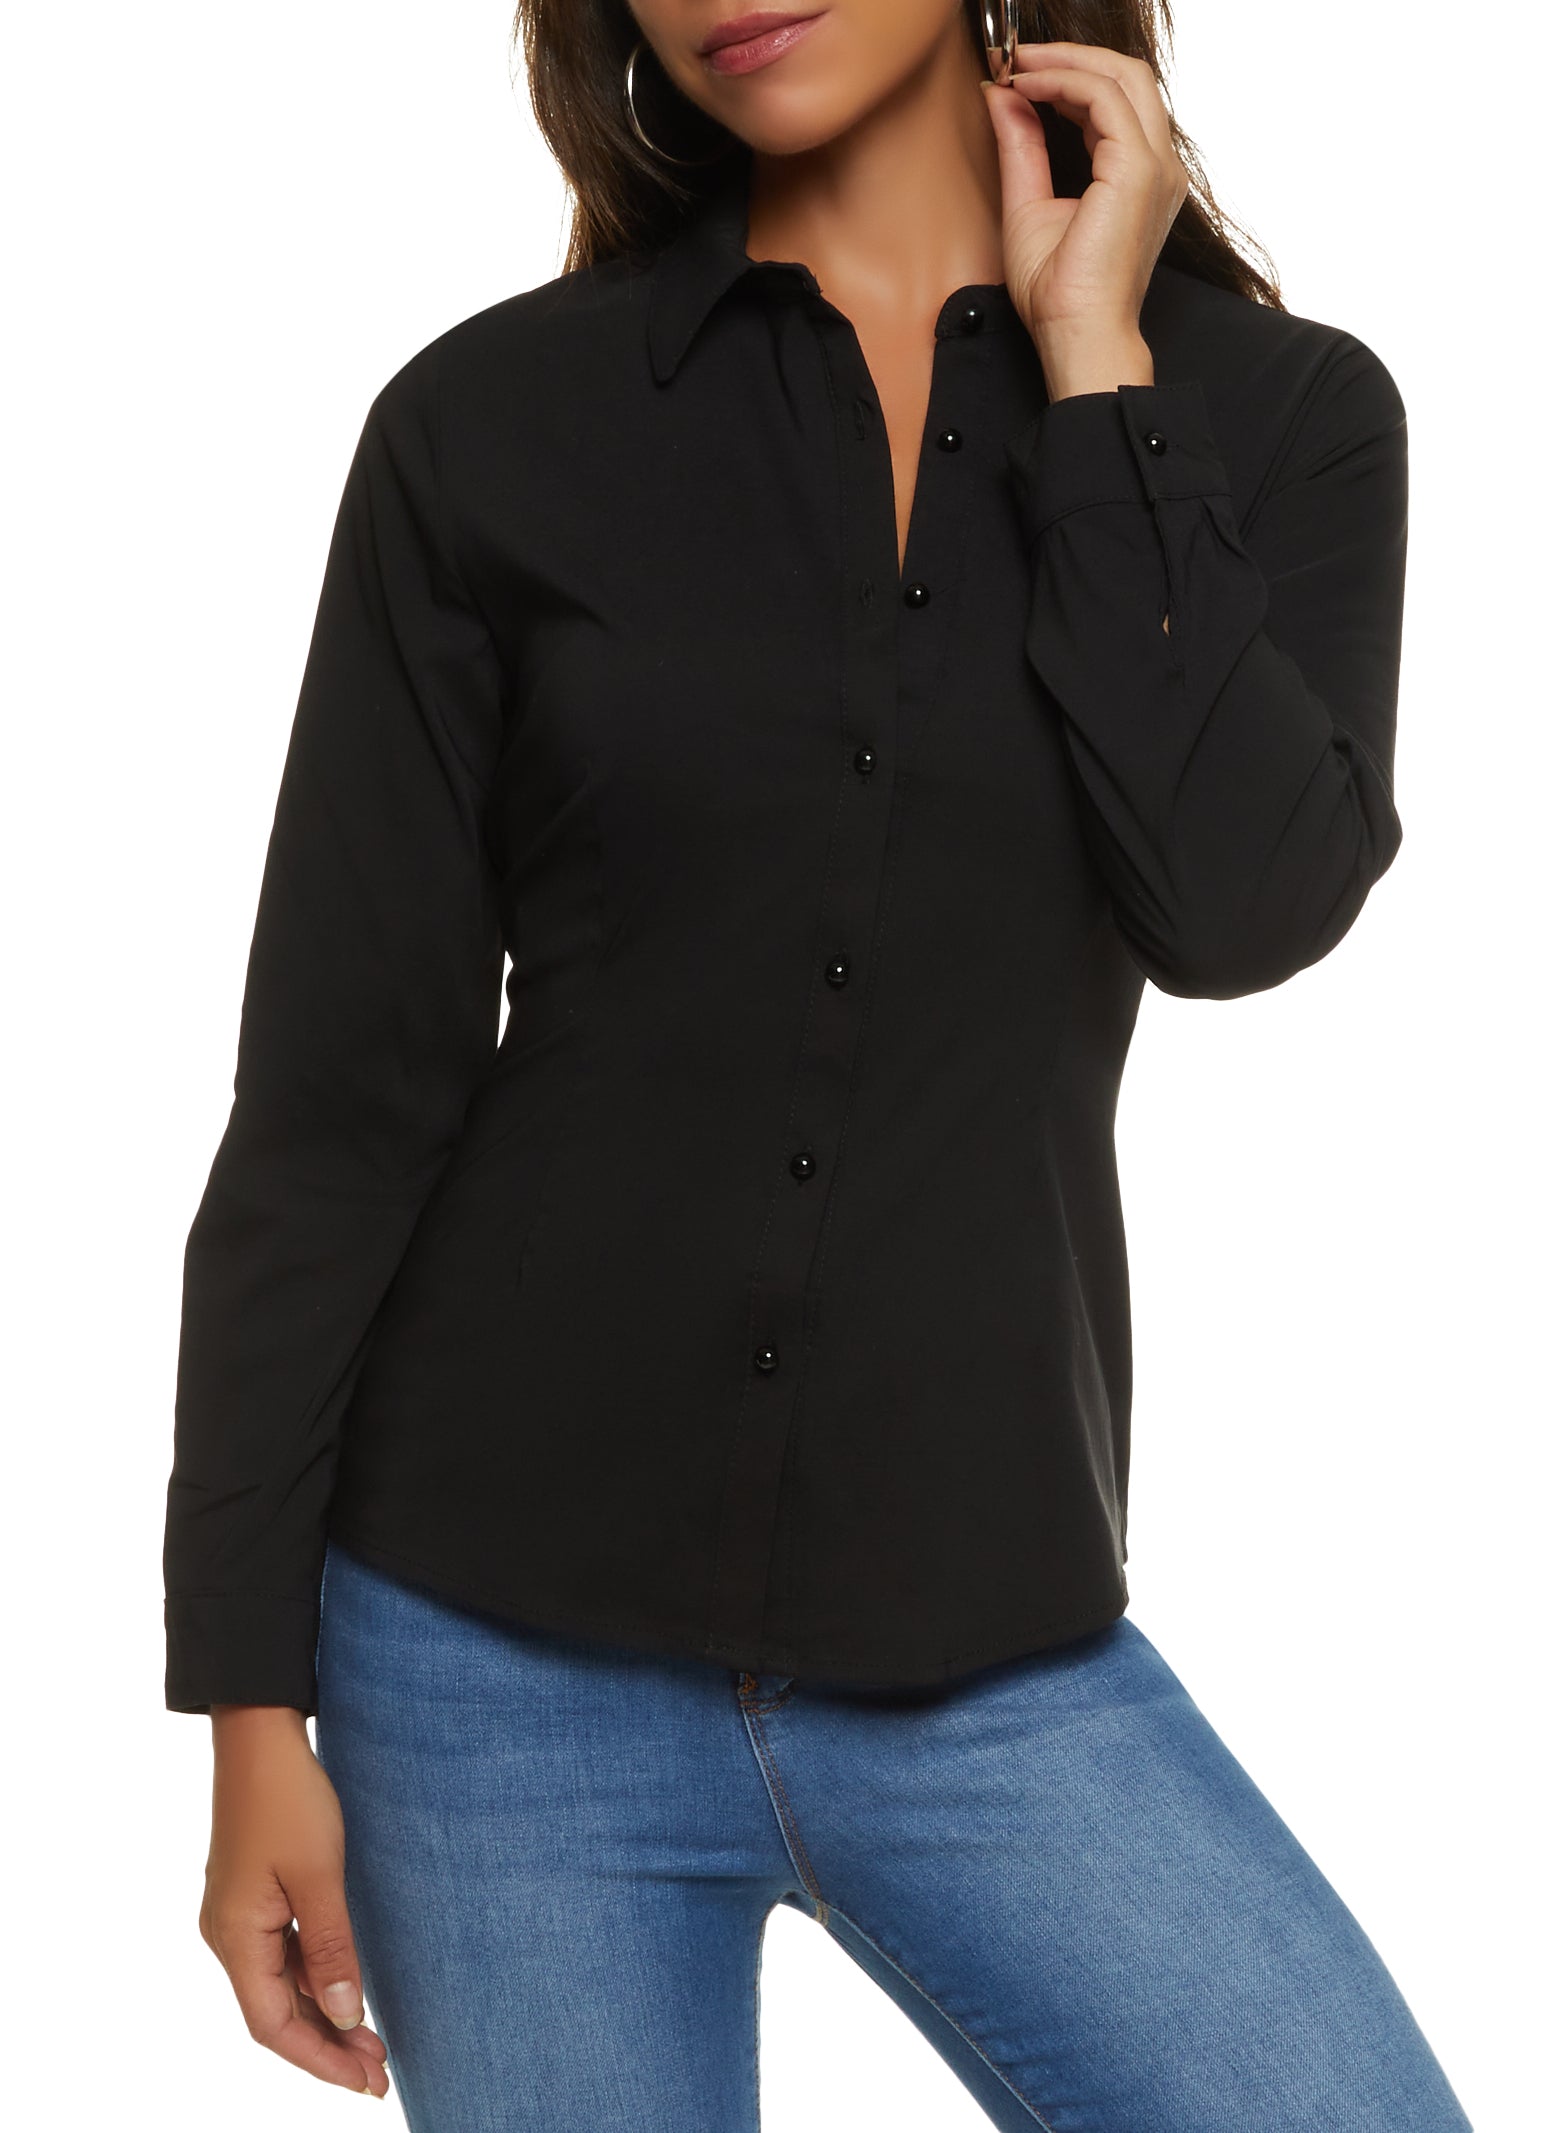 Womens Long Sleeve Faux Pearl Button Front Shirt, Black, Size S